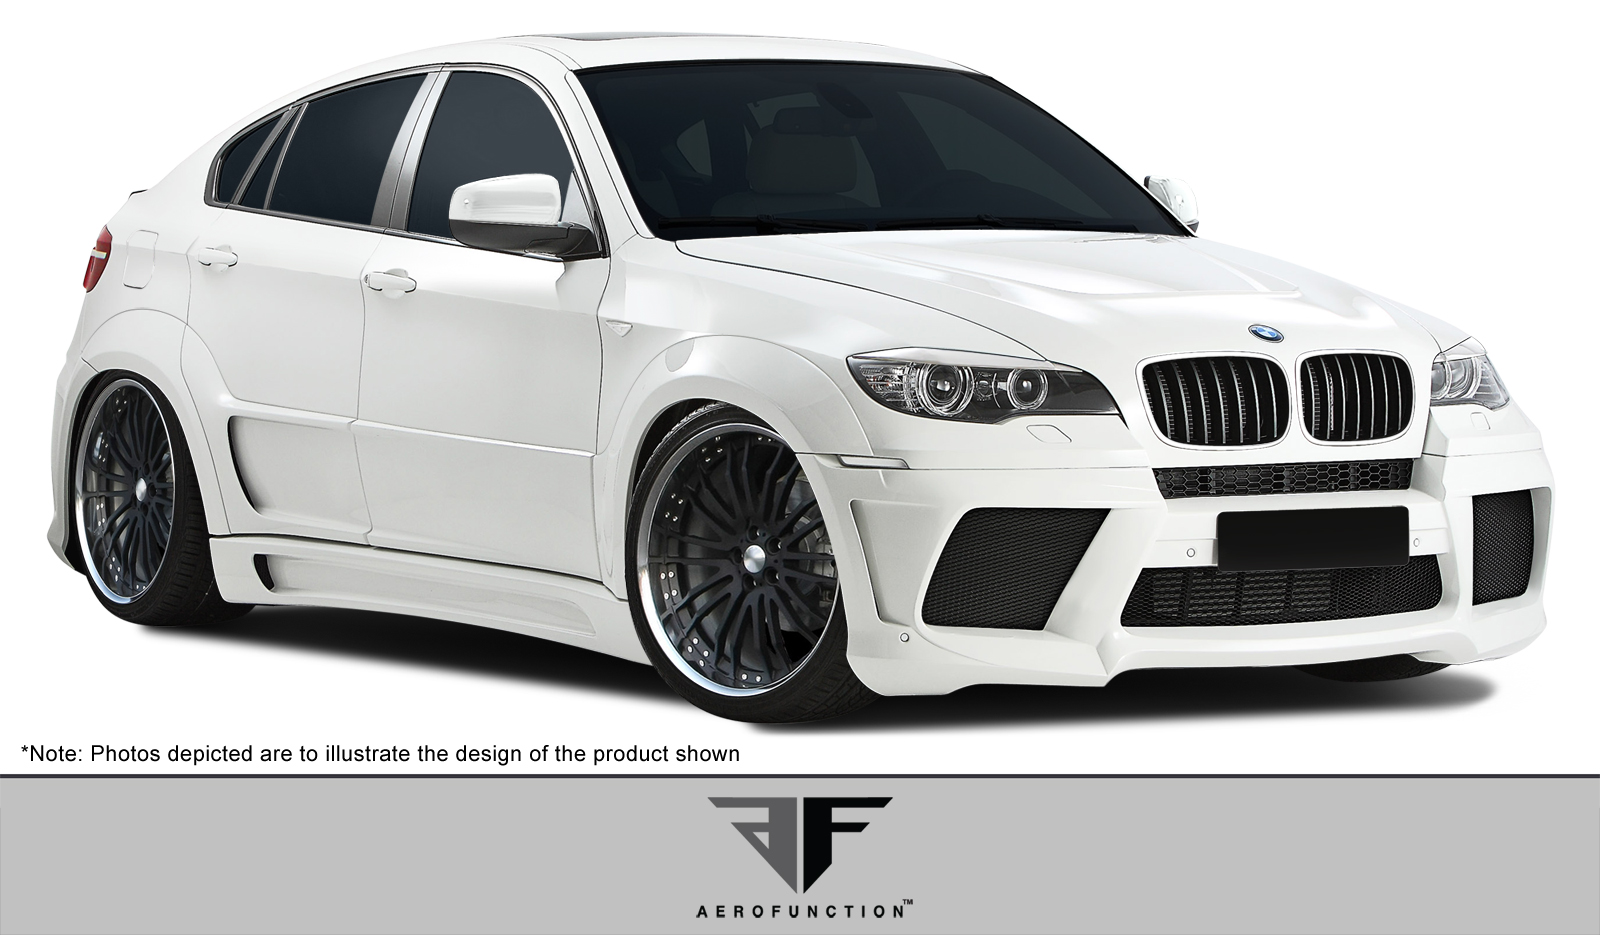 2011 BMW X6 ALL - Other Body Kit Bodykit - BMW X6 X6M AF-3 Wide Body Kit ( PUR-RIM ) - 12 Piece - Includes AF-3 Wide Body Front Bumper Cover (